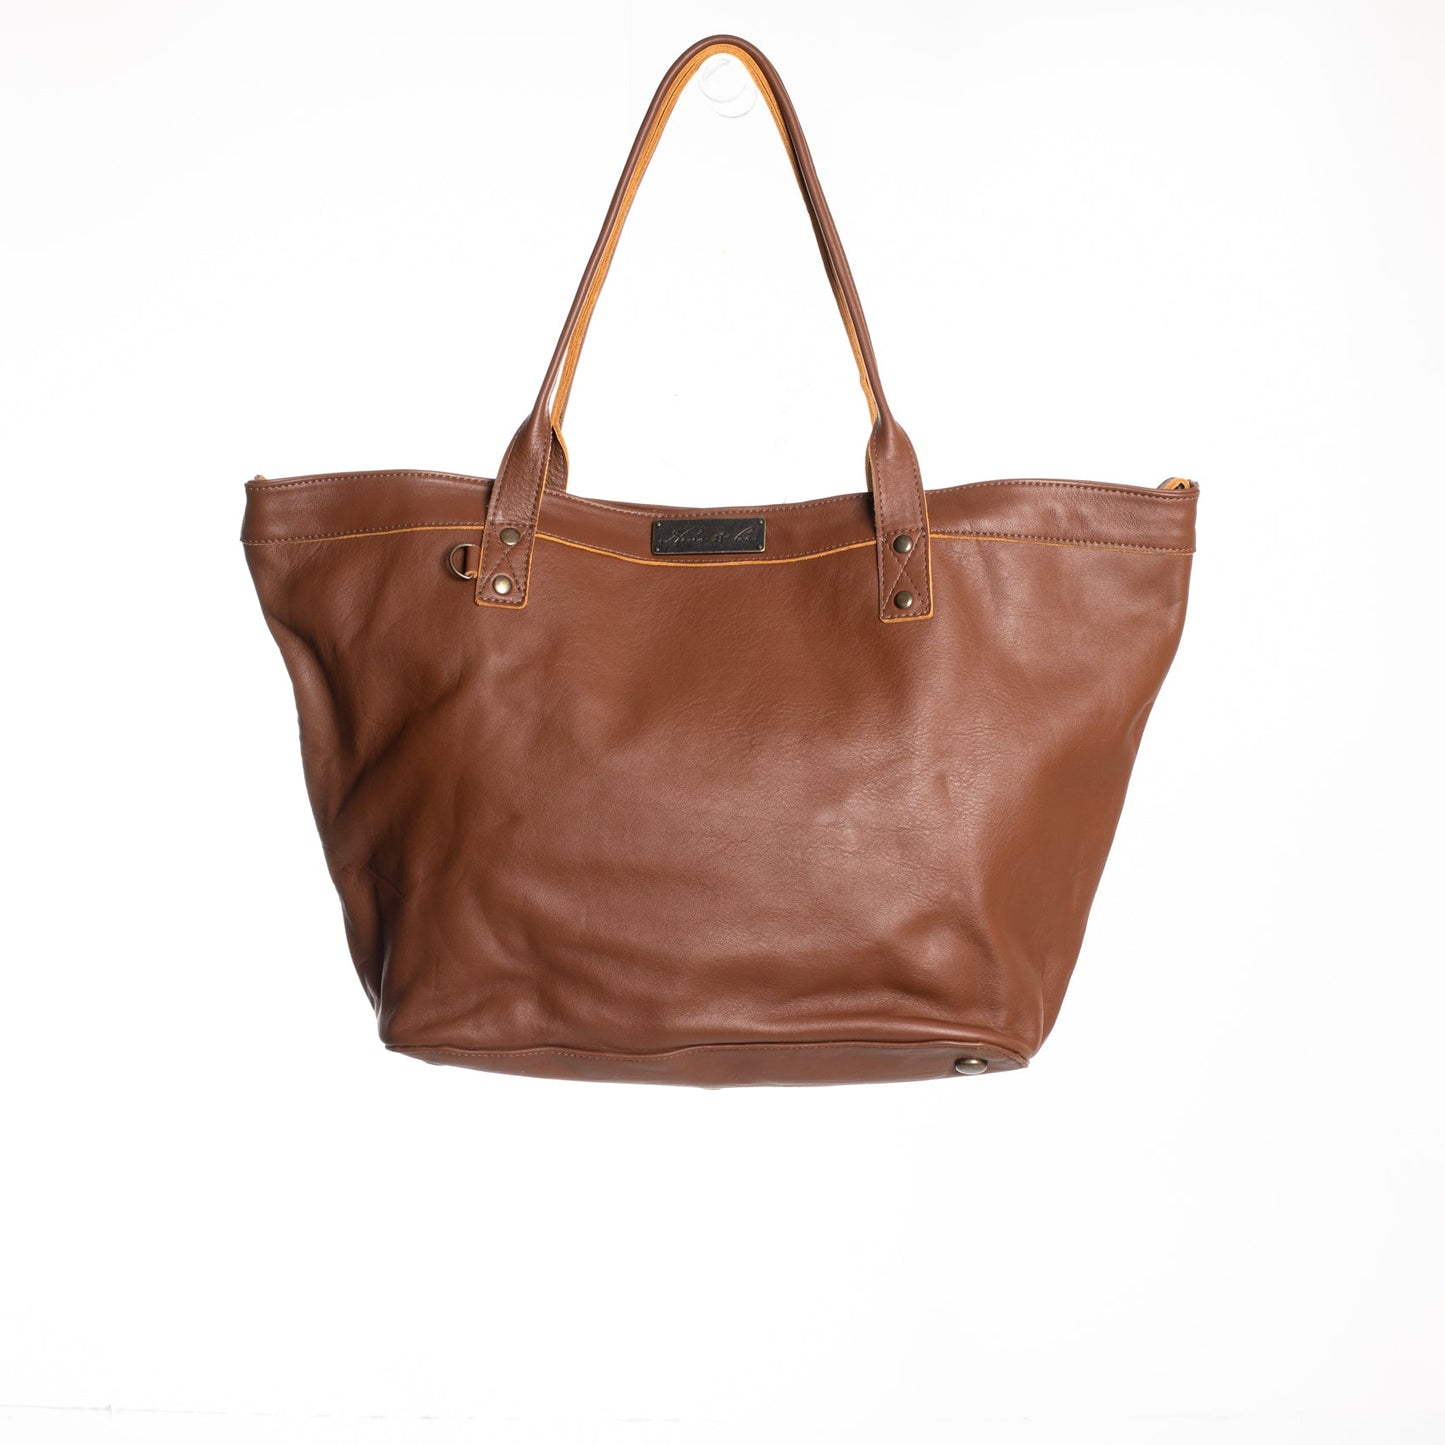 CONVERTIBLE TOTE - FULL LEATHER COLLECTION - WALNUT LEATHER